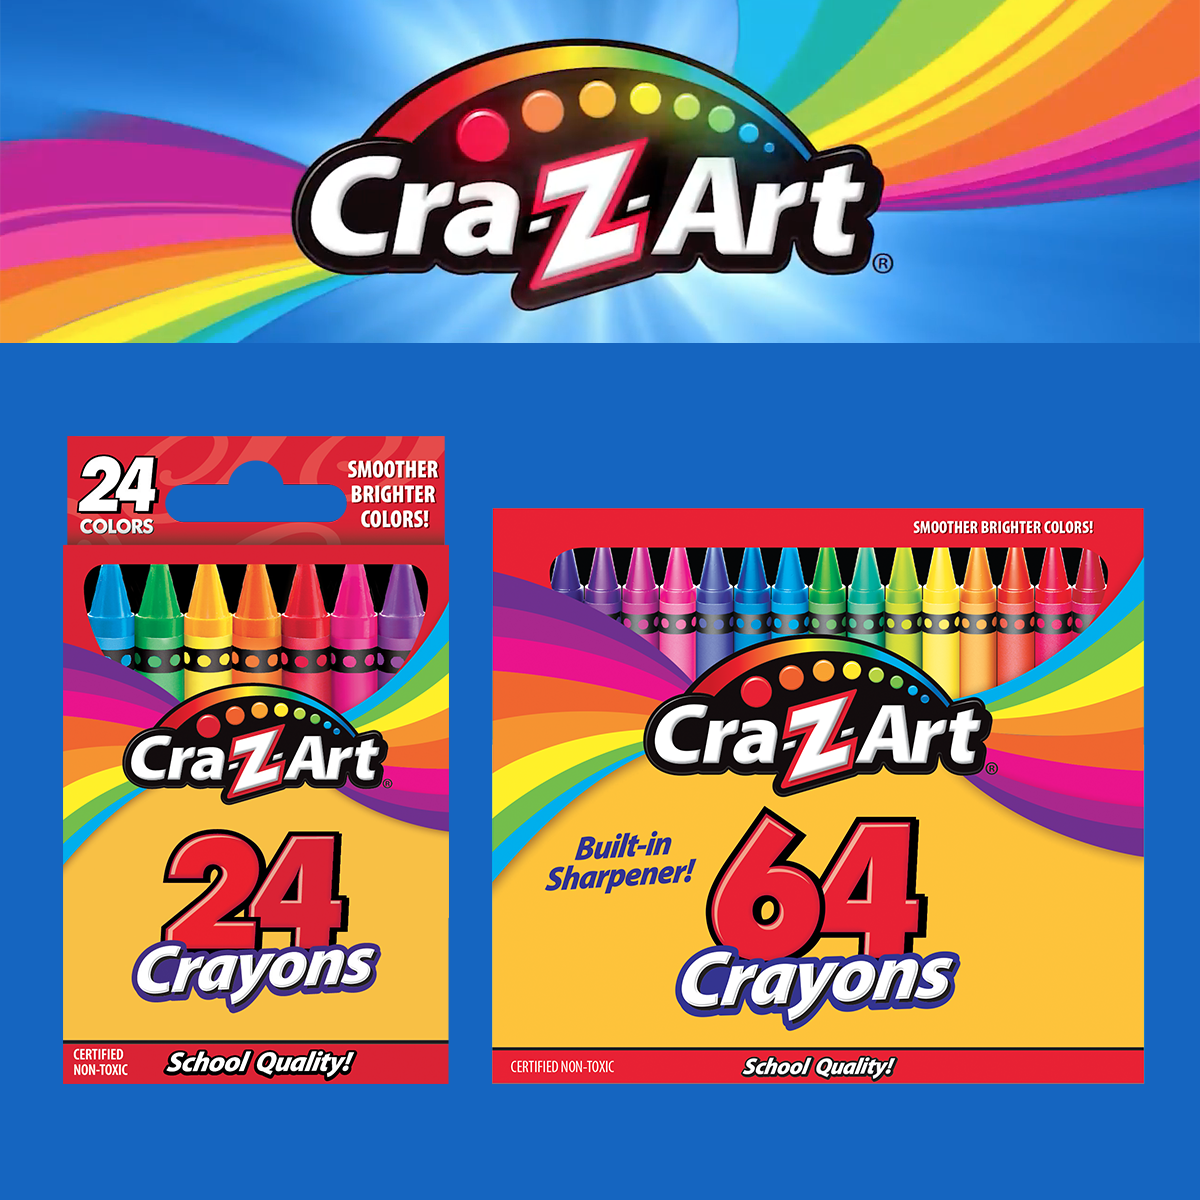 Cra-Z-Art Smoother Brighter Colors Non-toxic Crayons (24 Pack) 